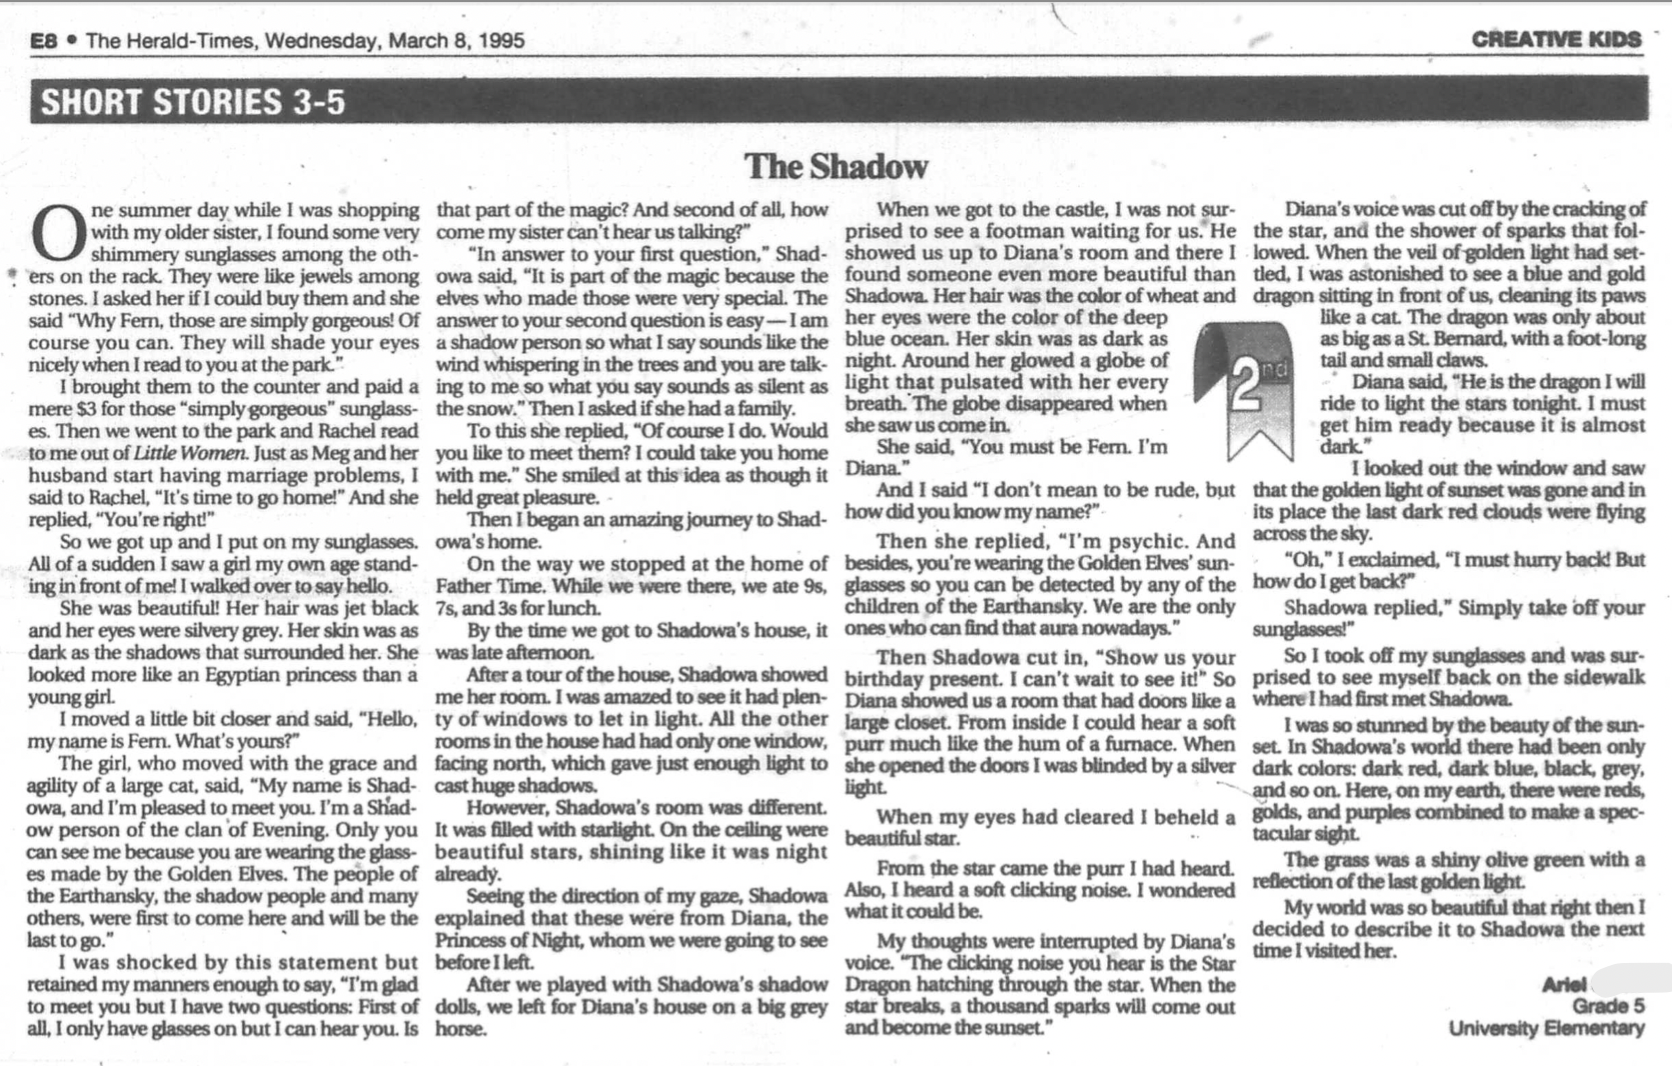 Black and white scan from The Herald Times Creative Kids, March 8, 1995 of The Shadow